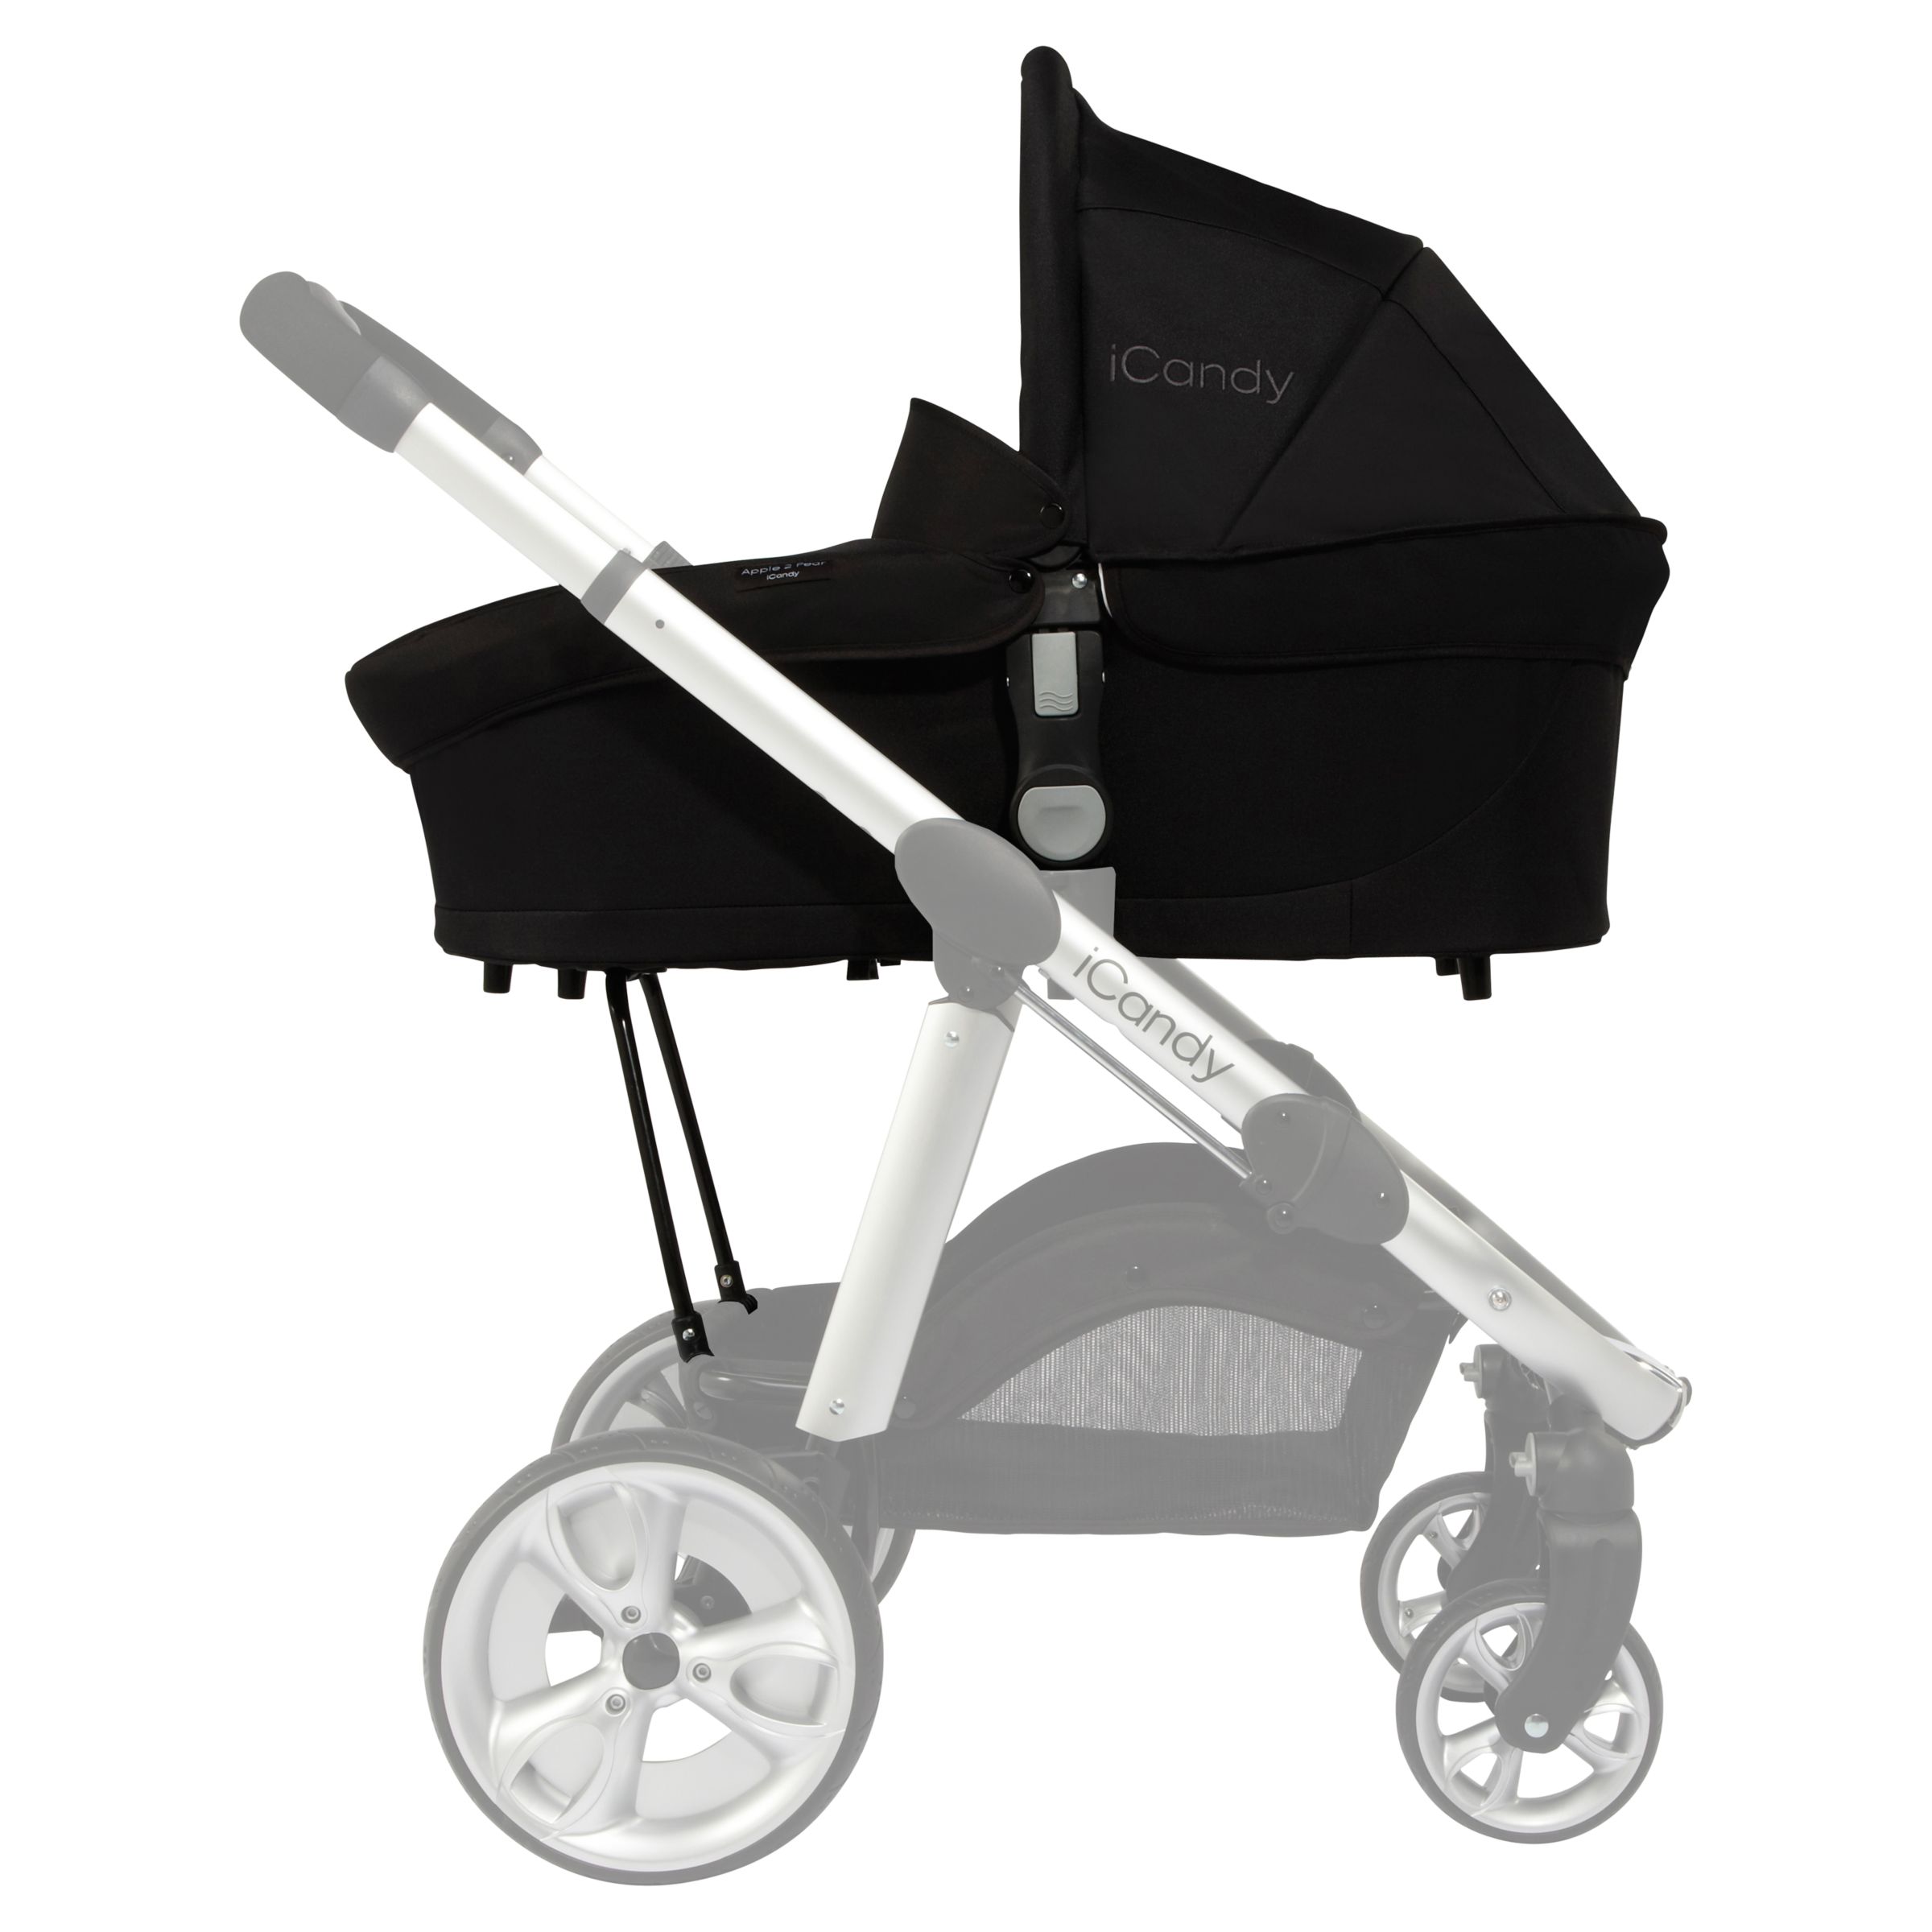 icandy apple to pear carrycot